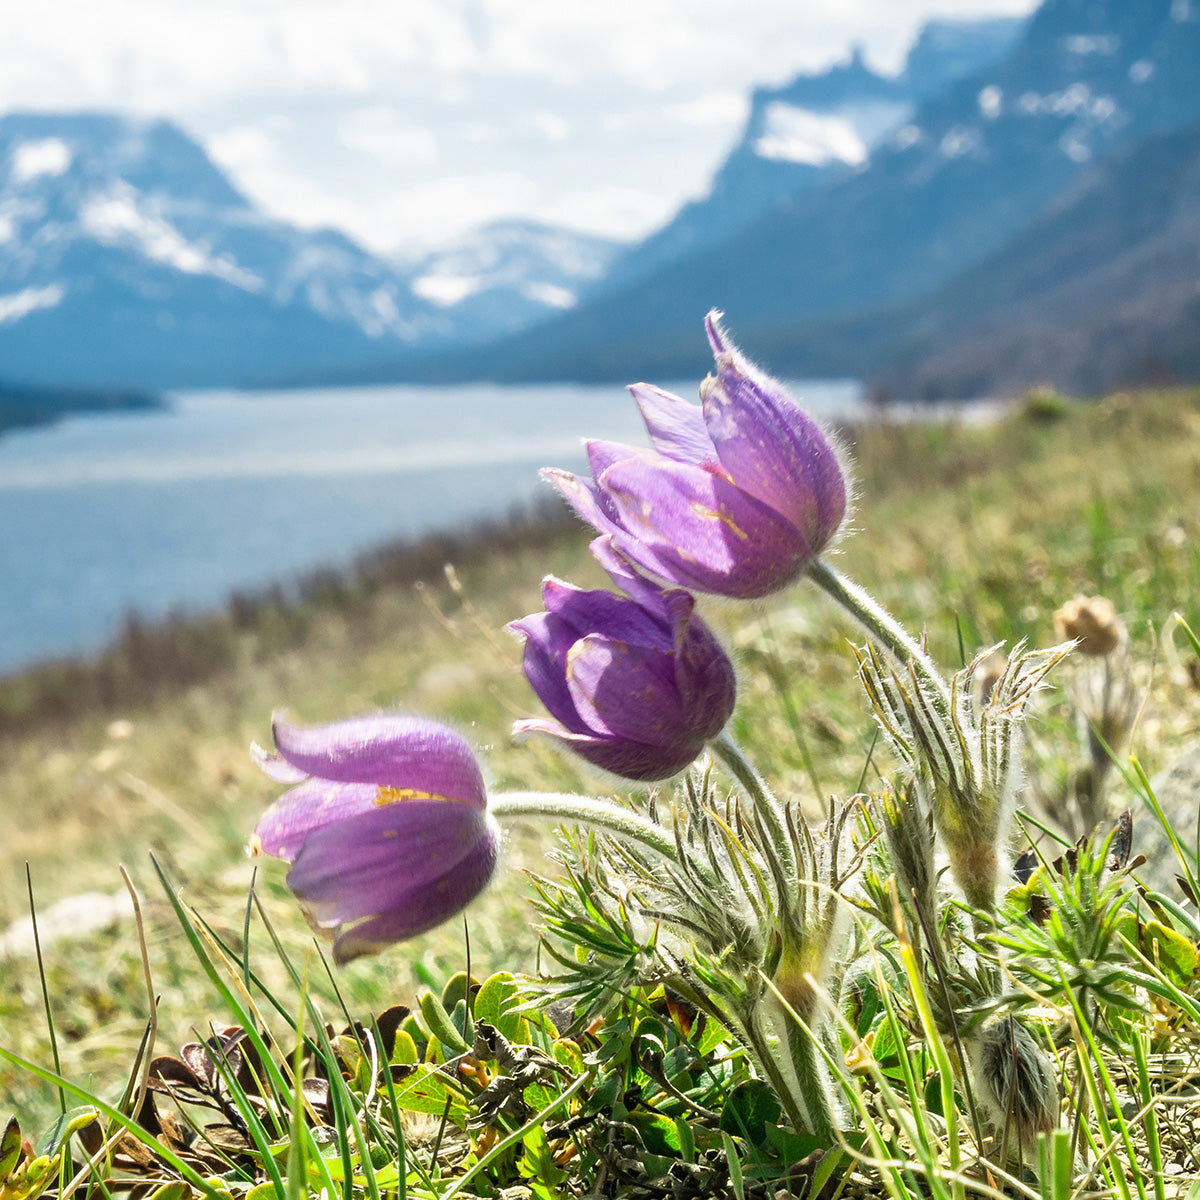 nourish nature with a wildflower bouquet - WWF-Canada